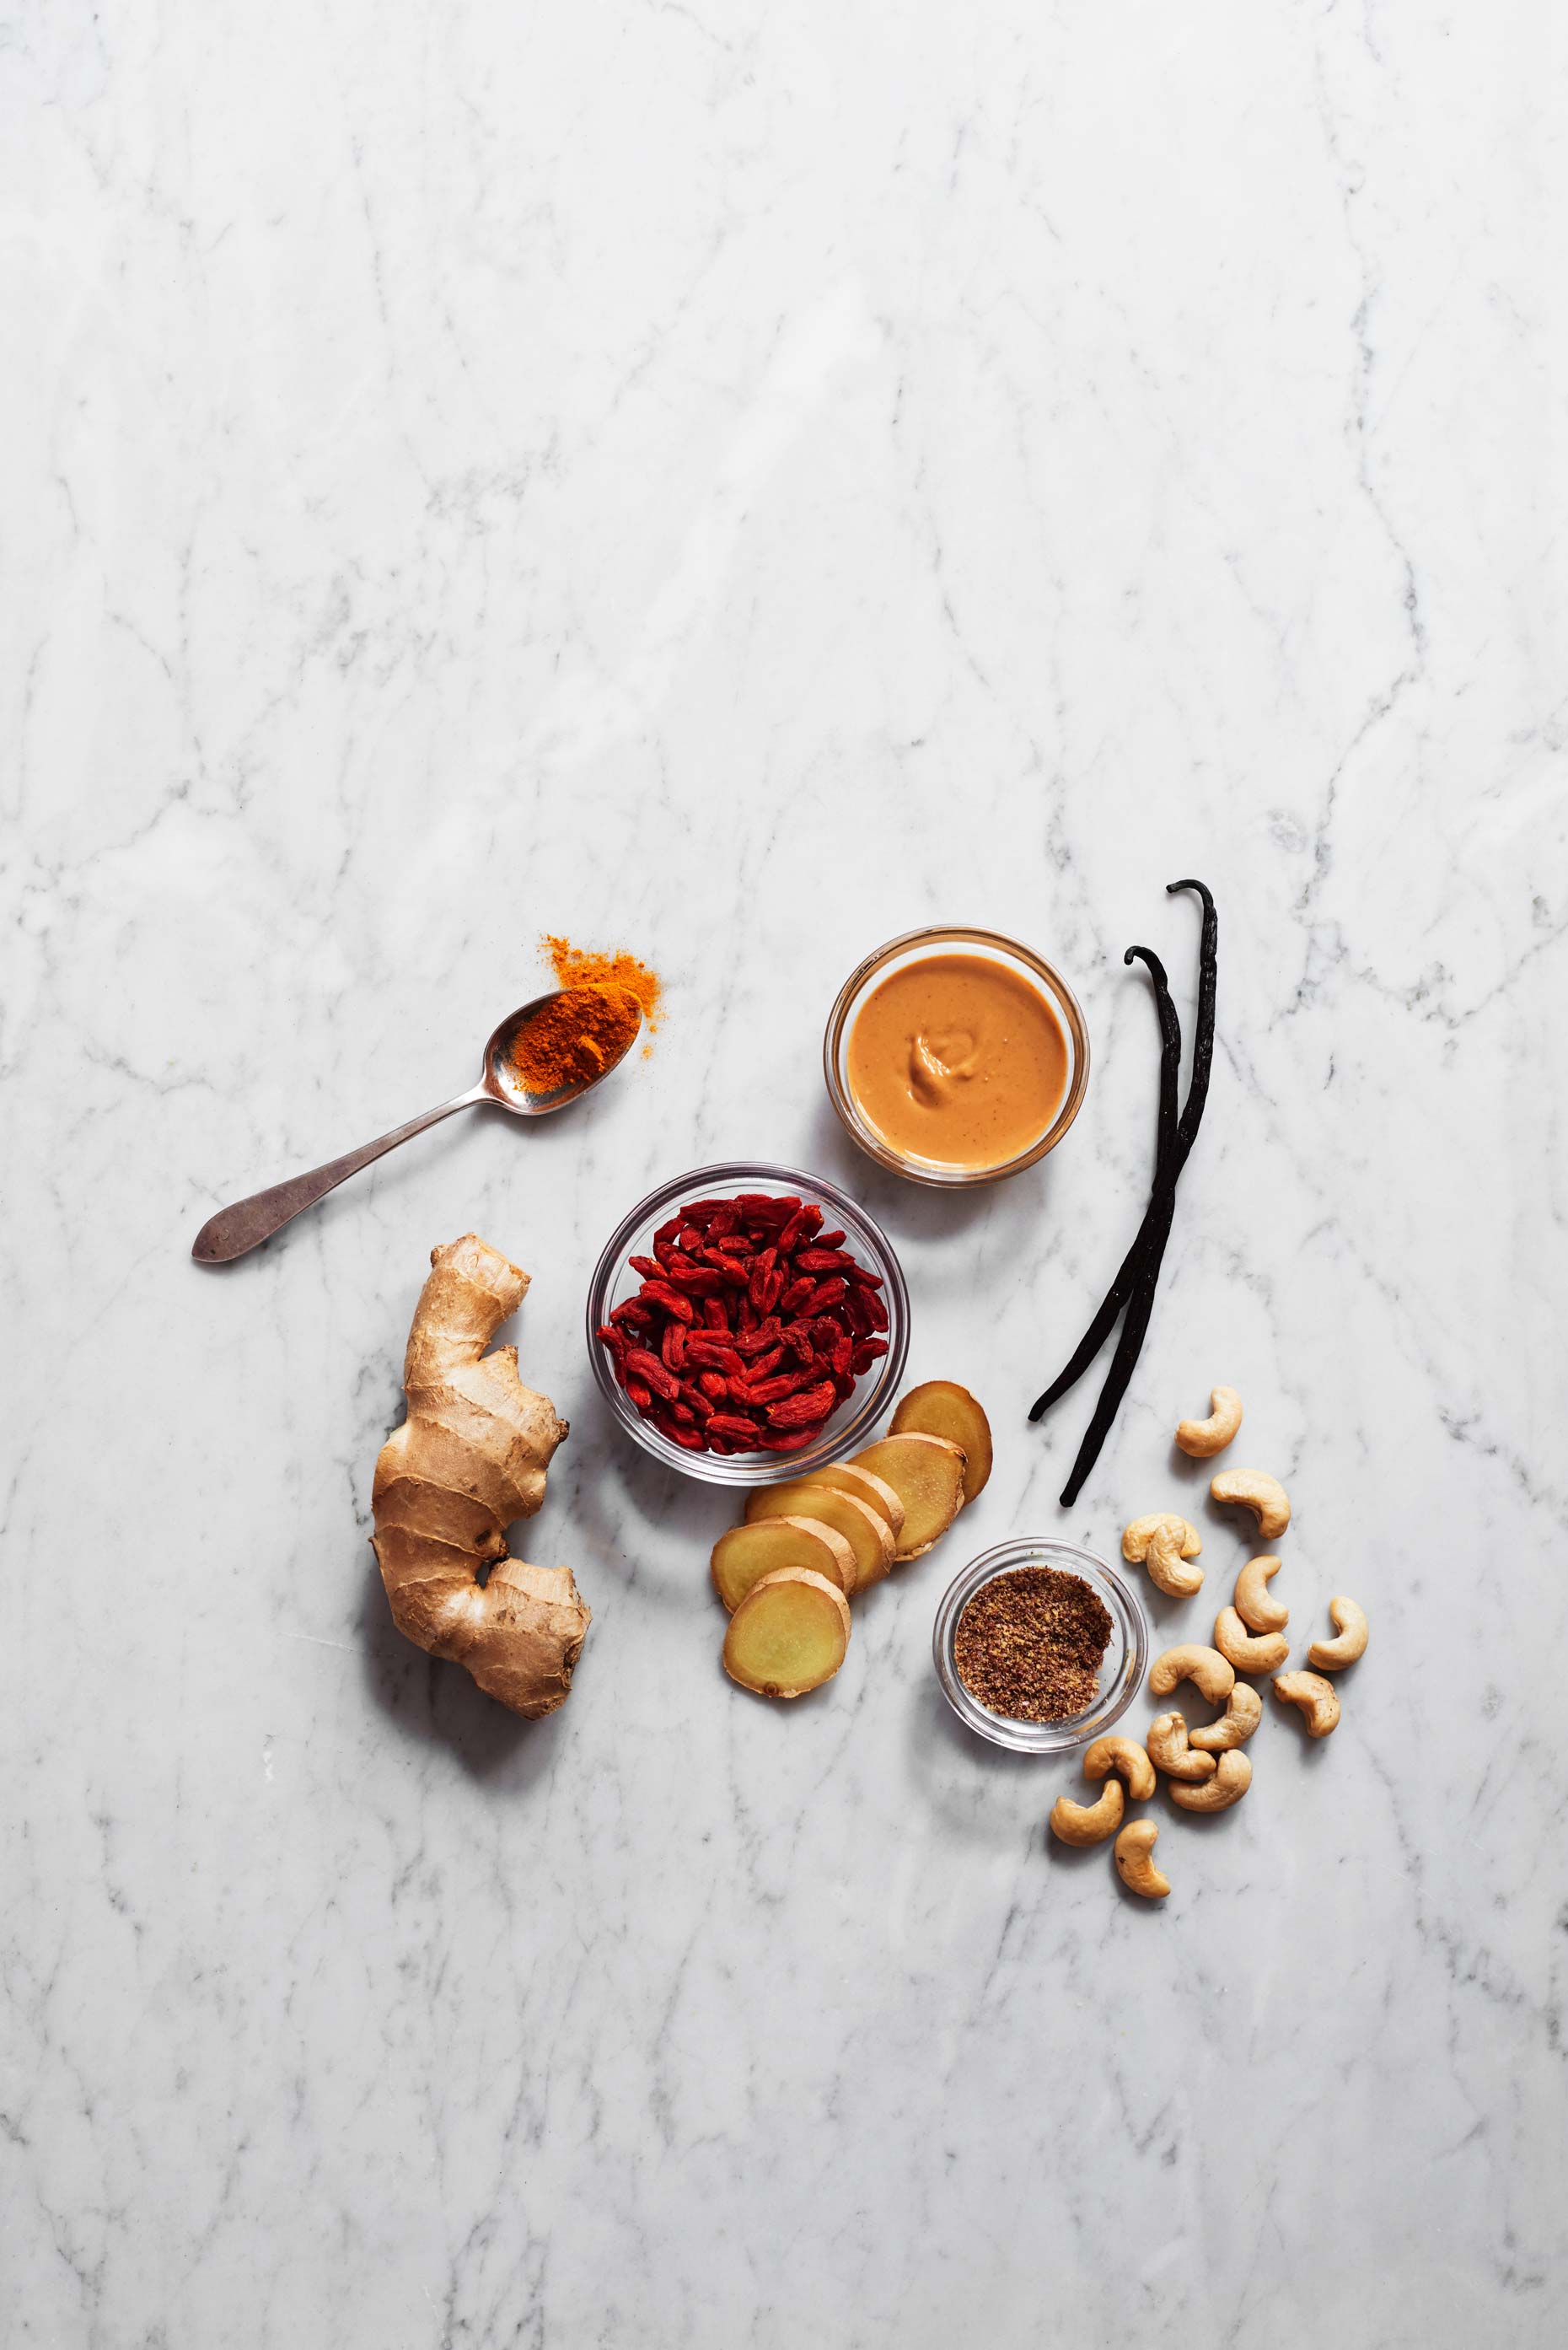 Red Ntidote ingredients on white marble photographed by Food Photographer Adrian Mueller New York